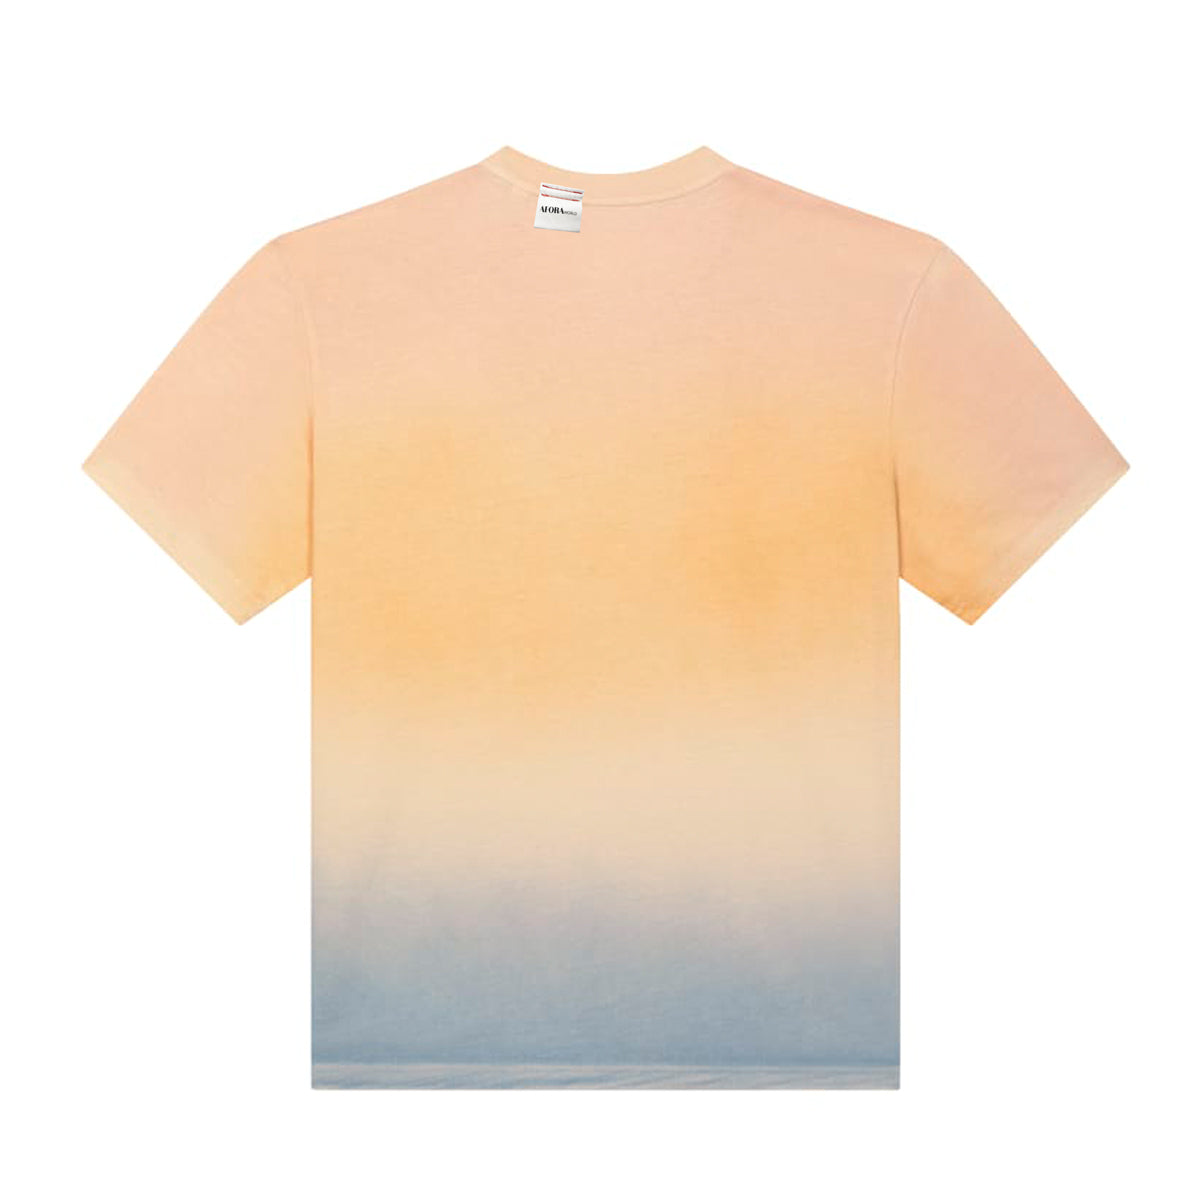 "no Plastic" Print T-Shirt ombre dip and dye